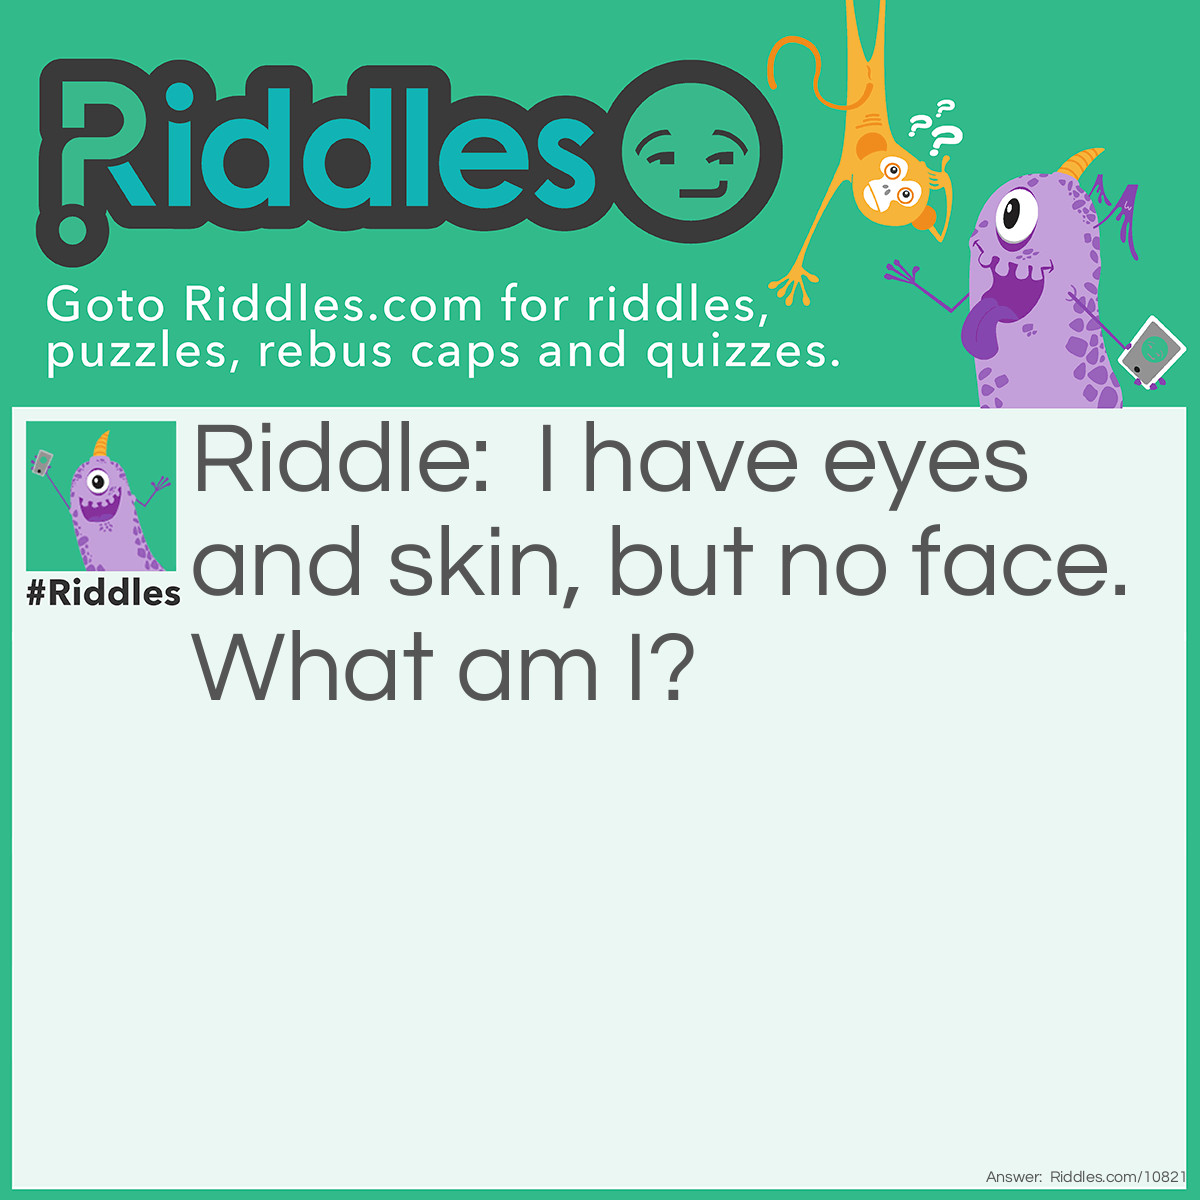 Riddle: I have eyes and skin, but no face. What am I? Answer: A potato.